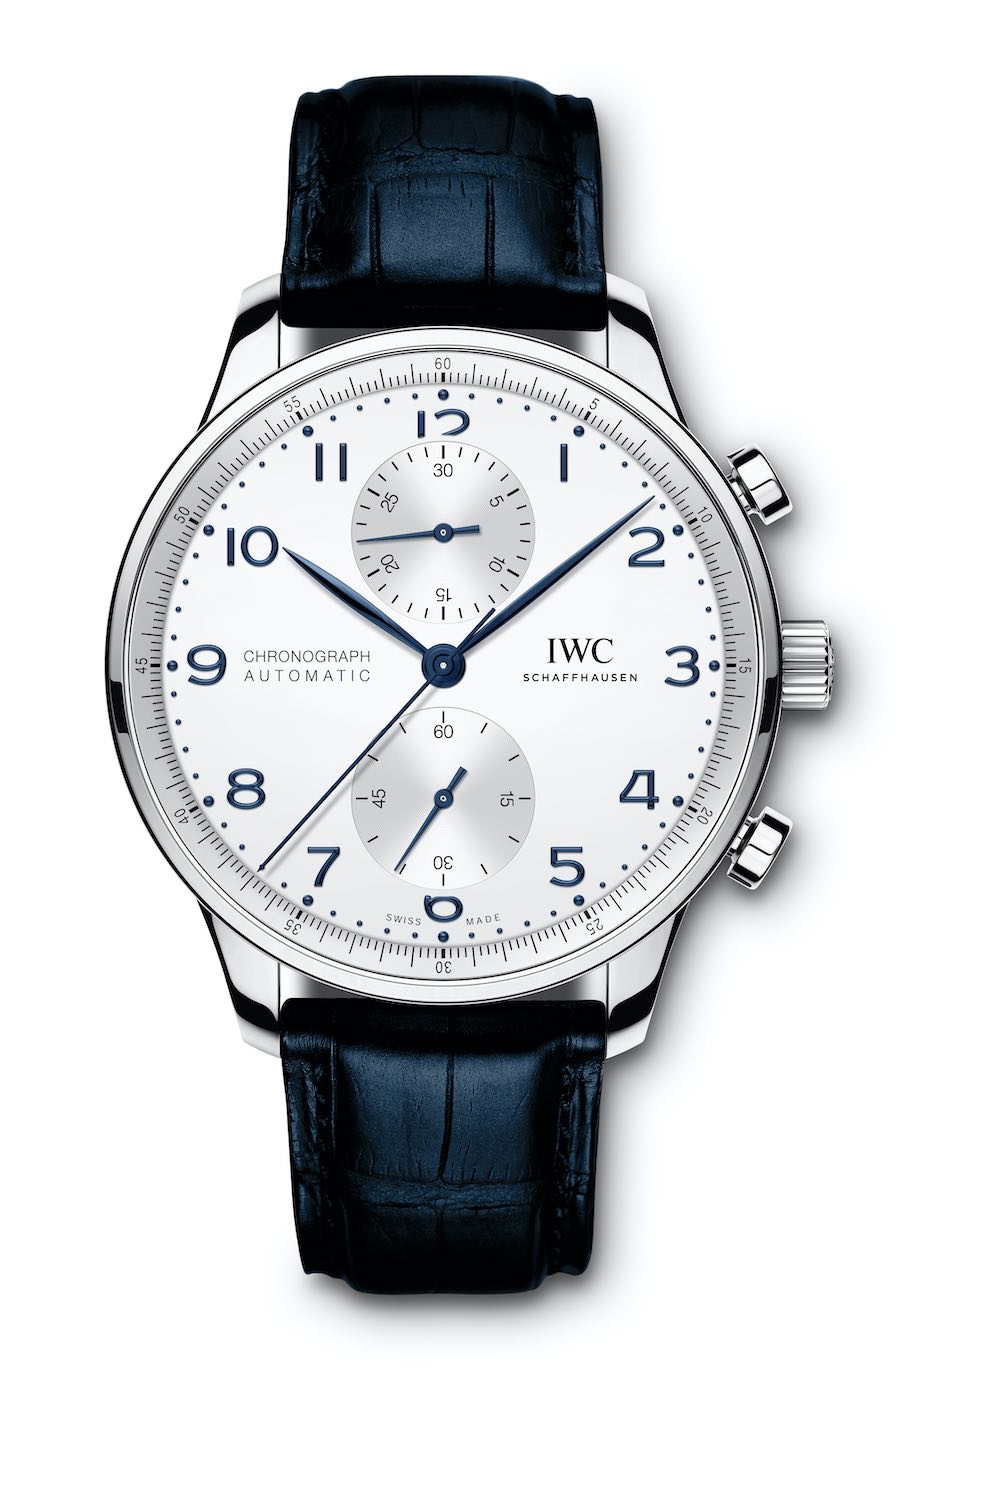 IWC Portugieser Chronograph iw3716 in-house calibre 69335 - iw371605